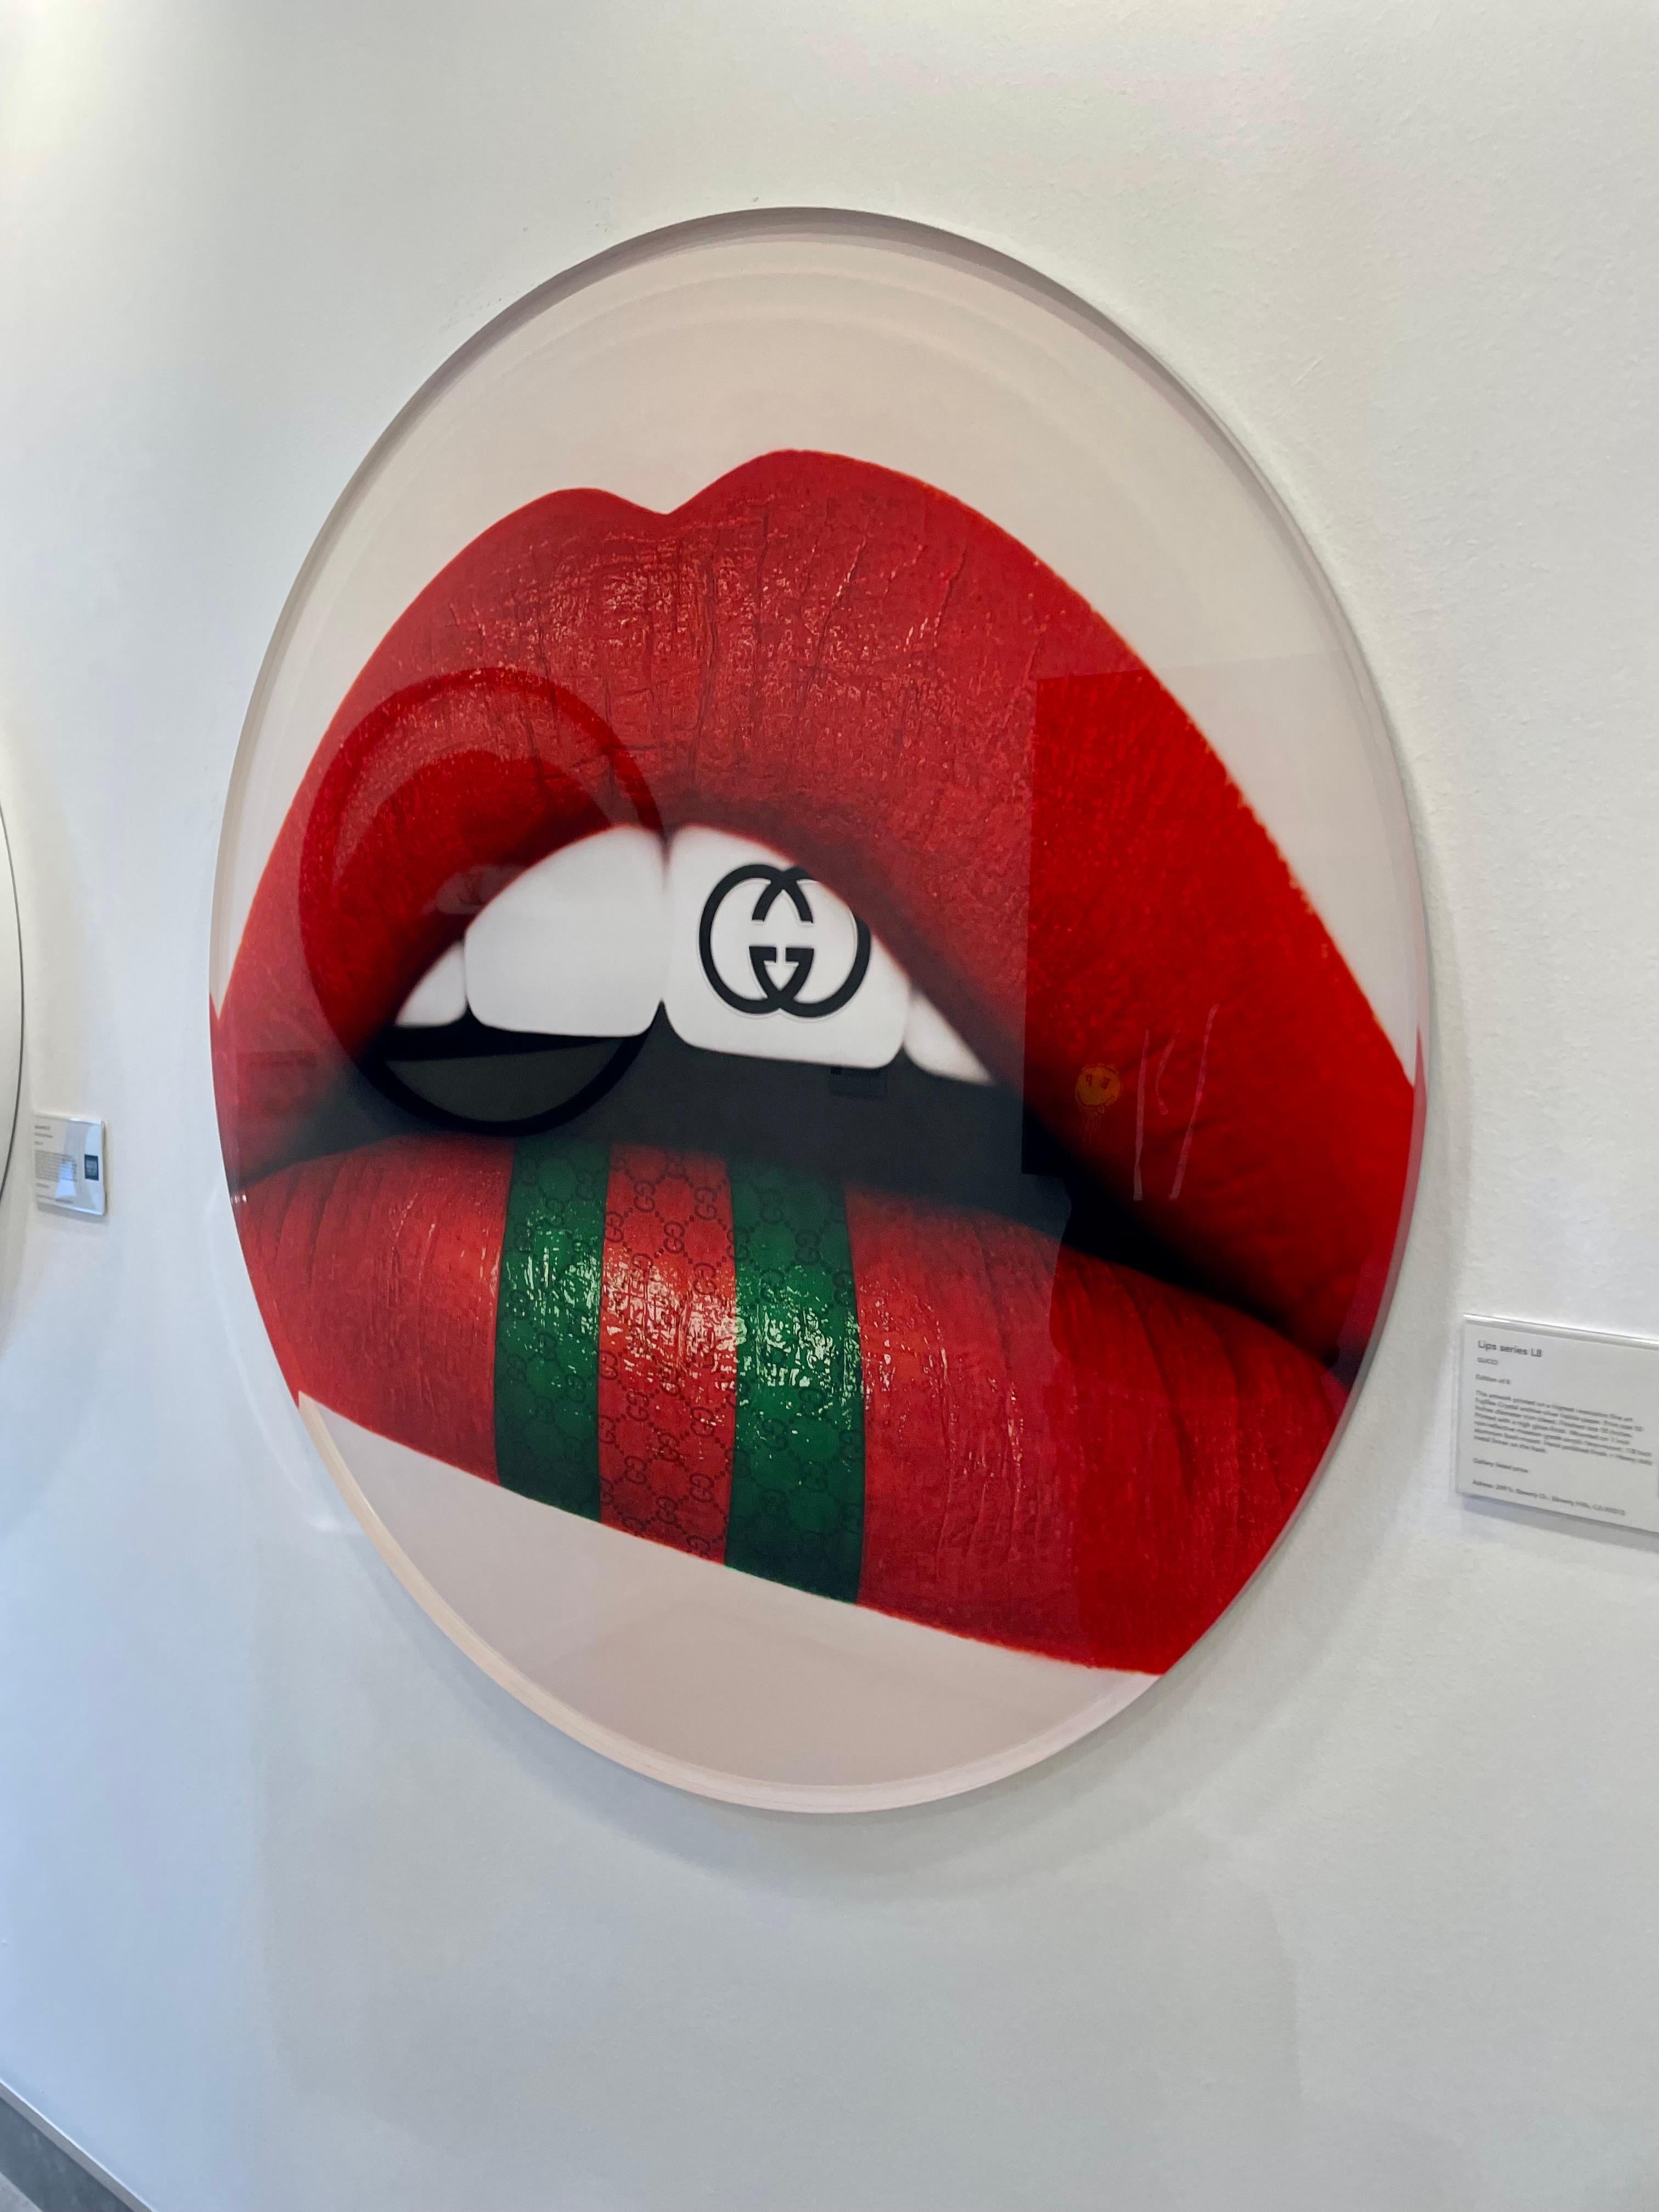 "LIPS - L8 GUCCI" Photography 50"D Edition 2/8 by Giuliano Bekor